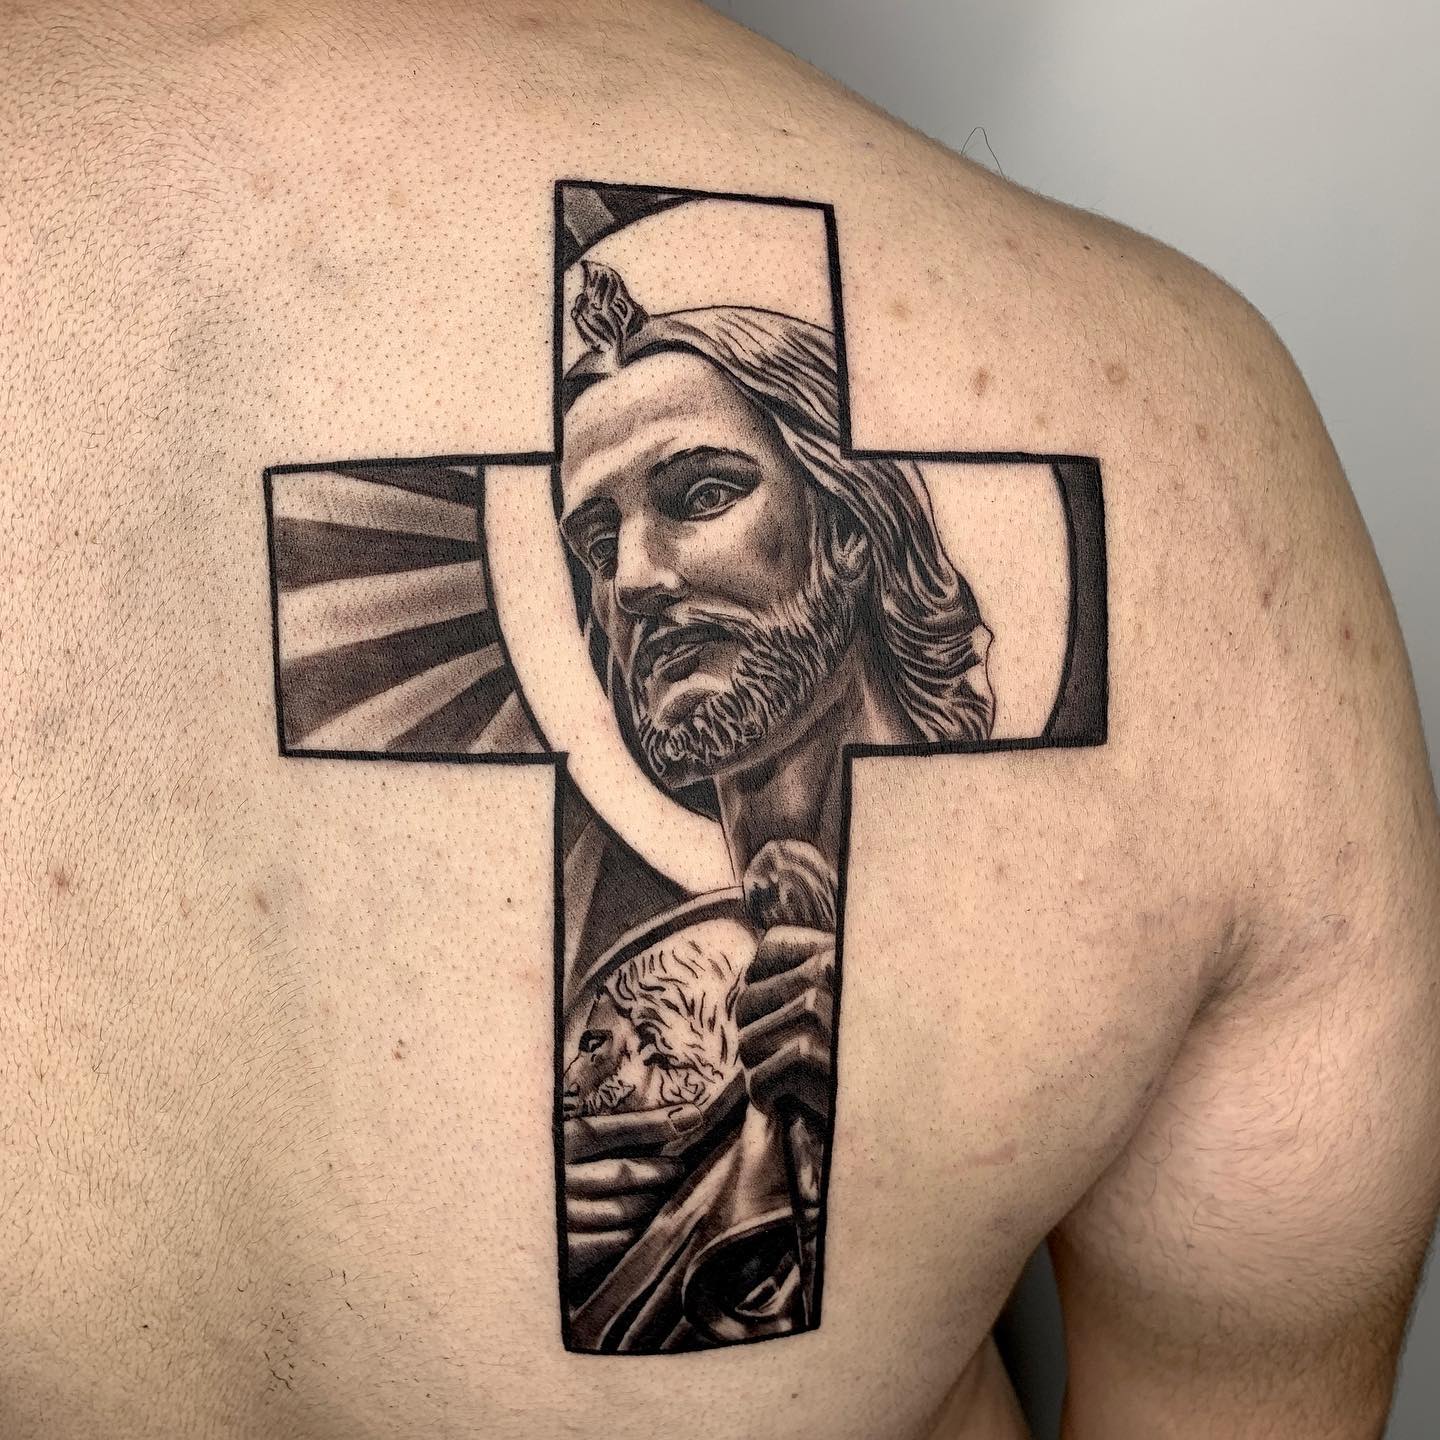 Saint Judas Tadeo Tattoo On The Forearm In Black And Gray  Starry Eyed  Tattoos and Body Art Studio